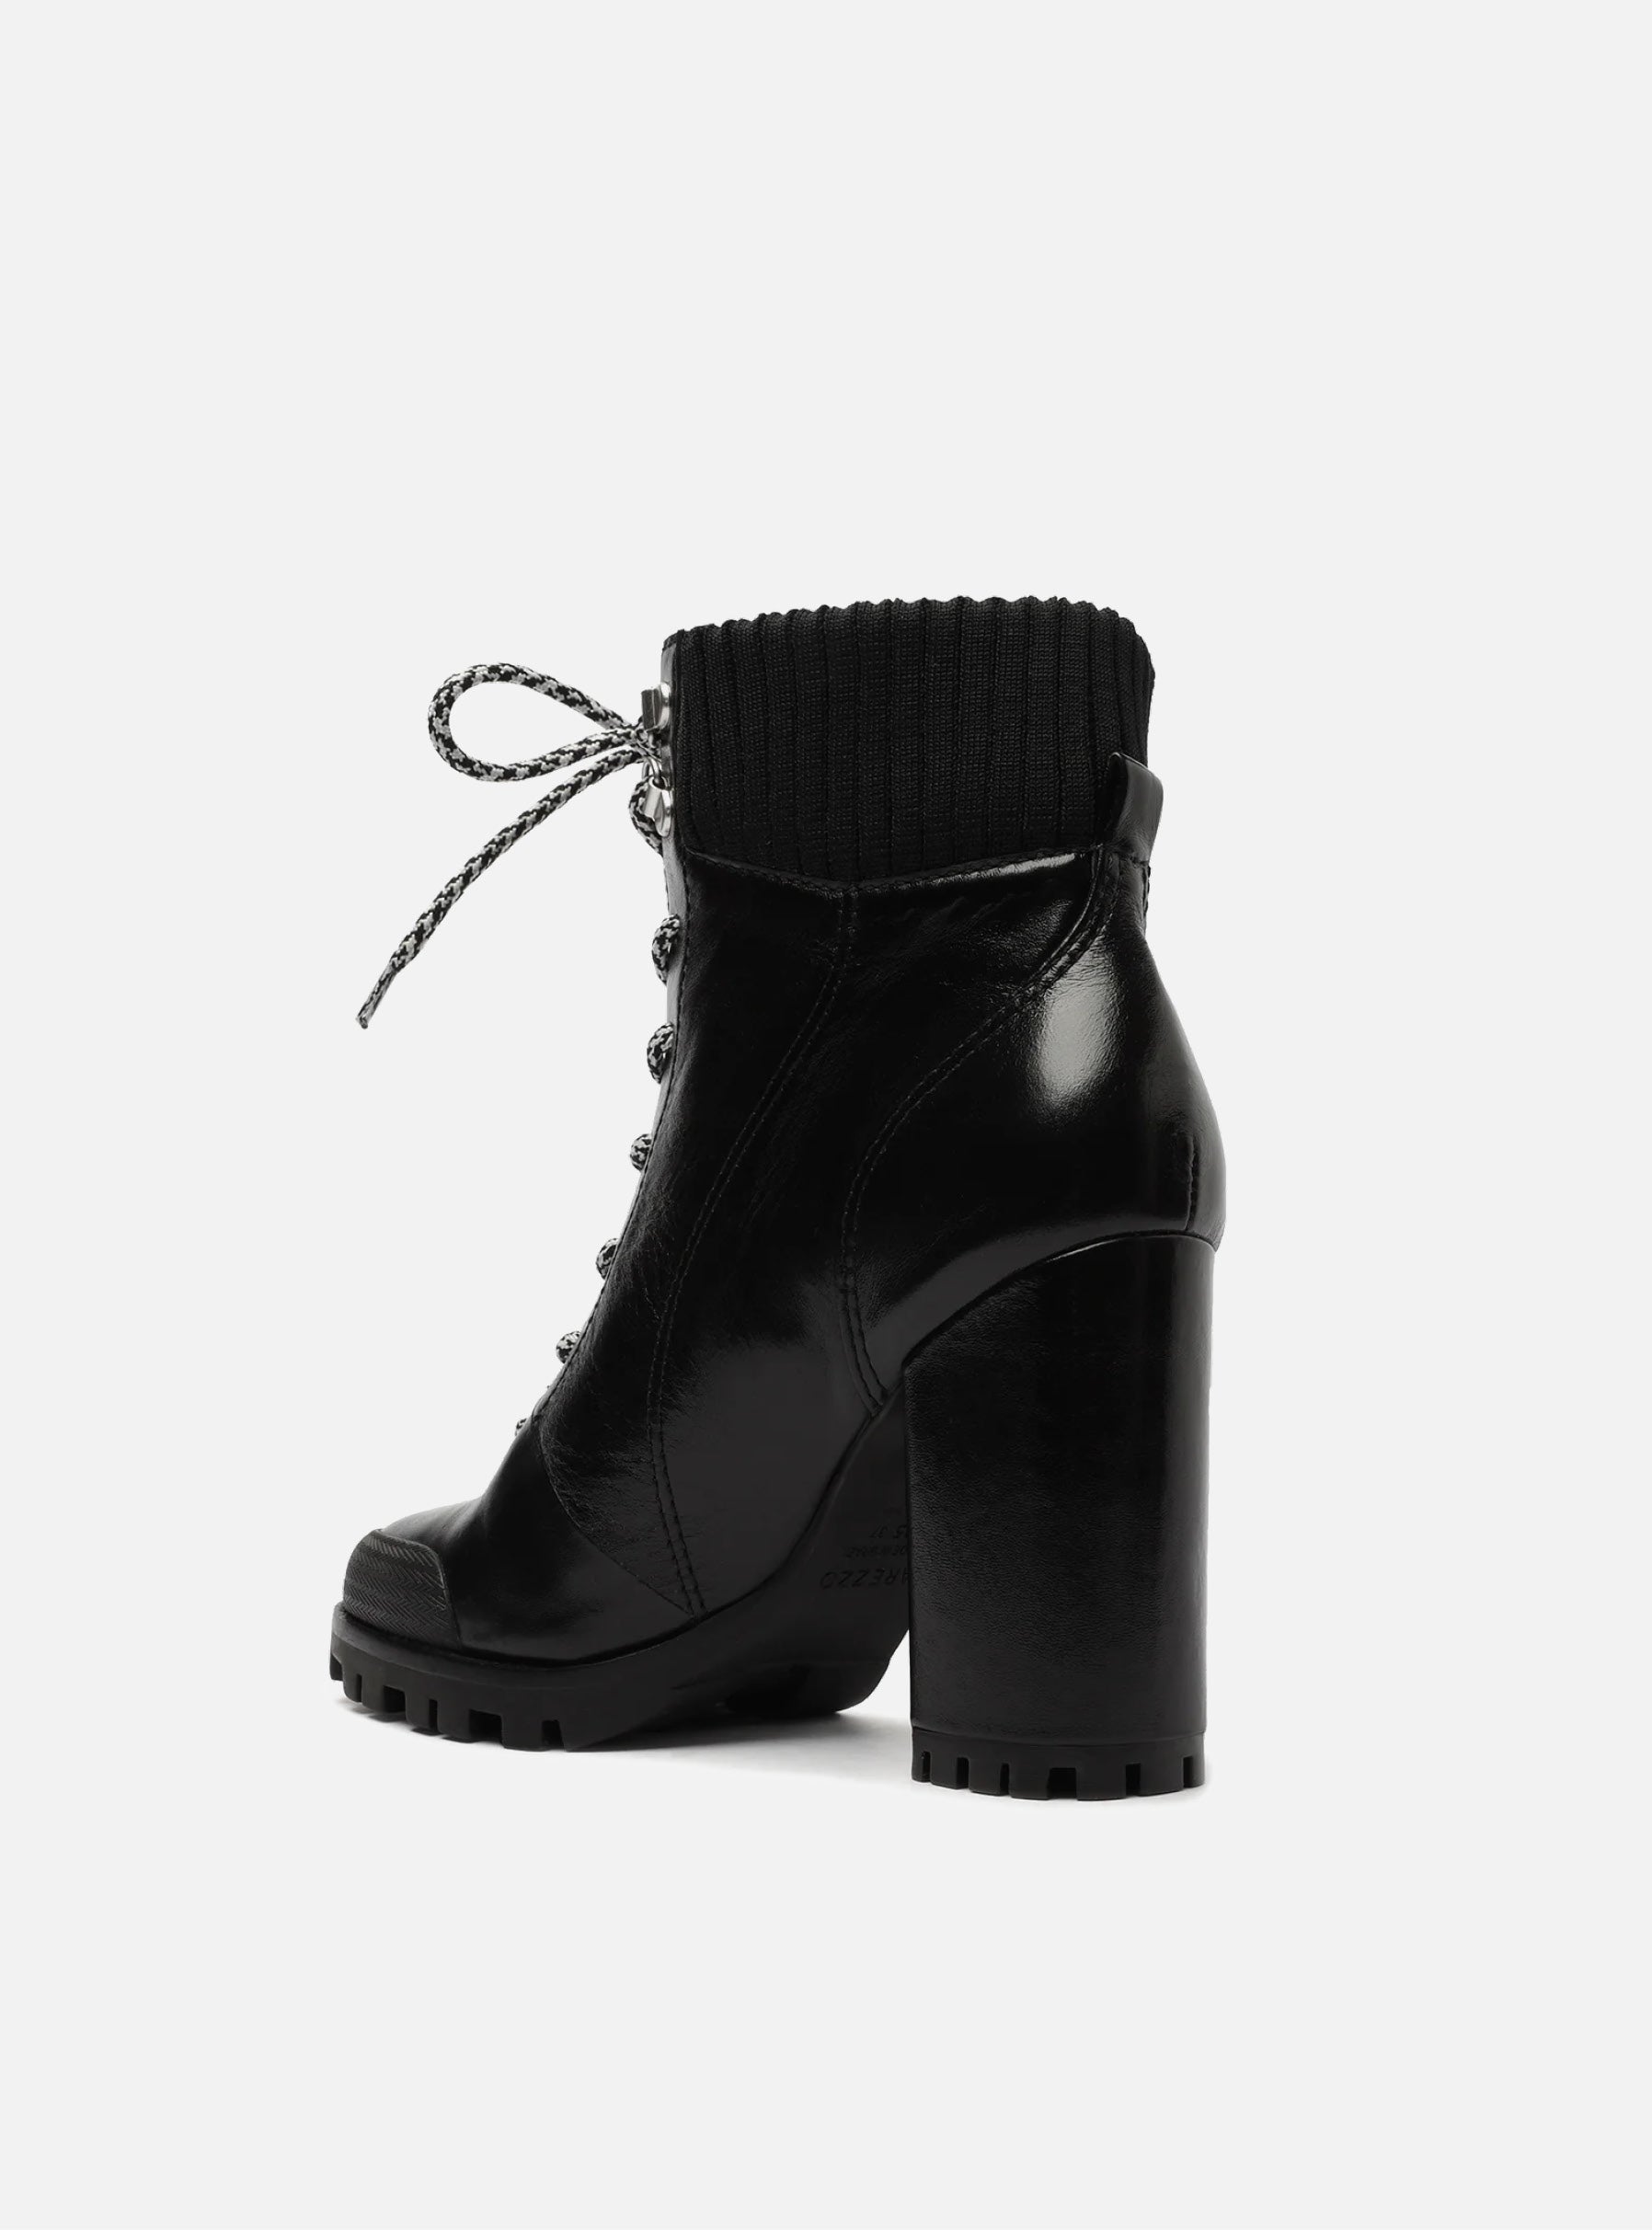 Black Leather Lizza Bootie Back View